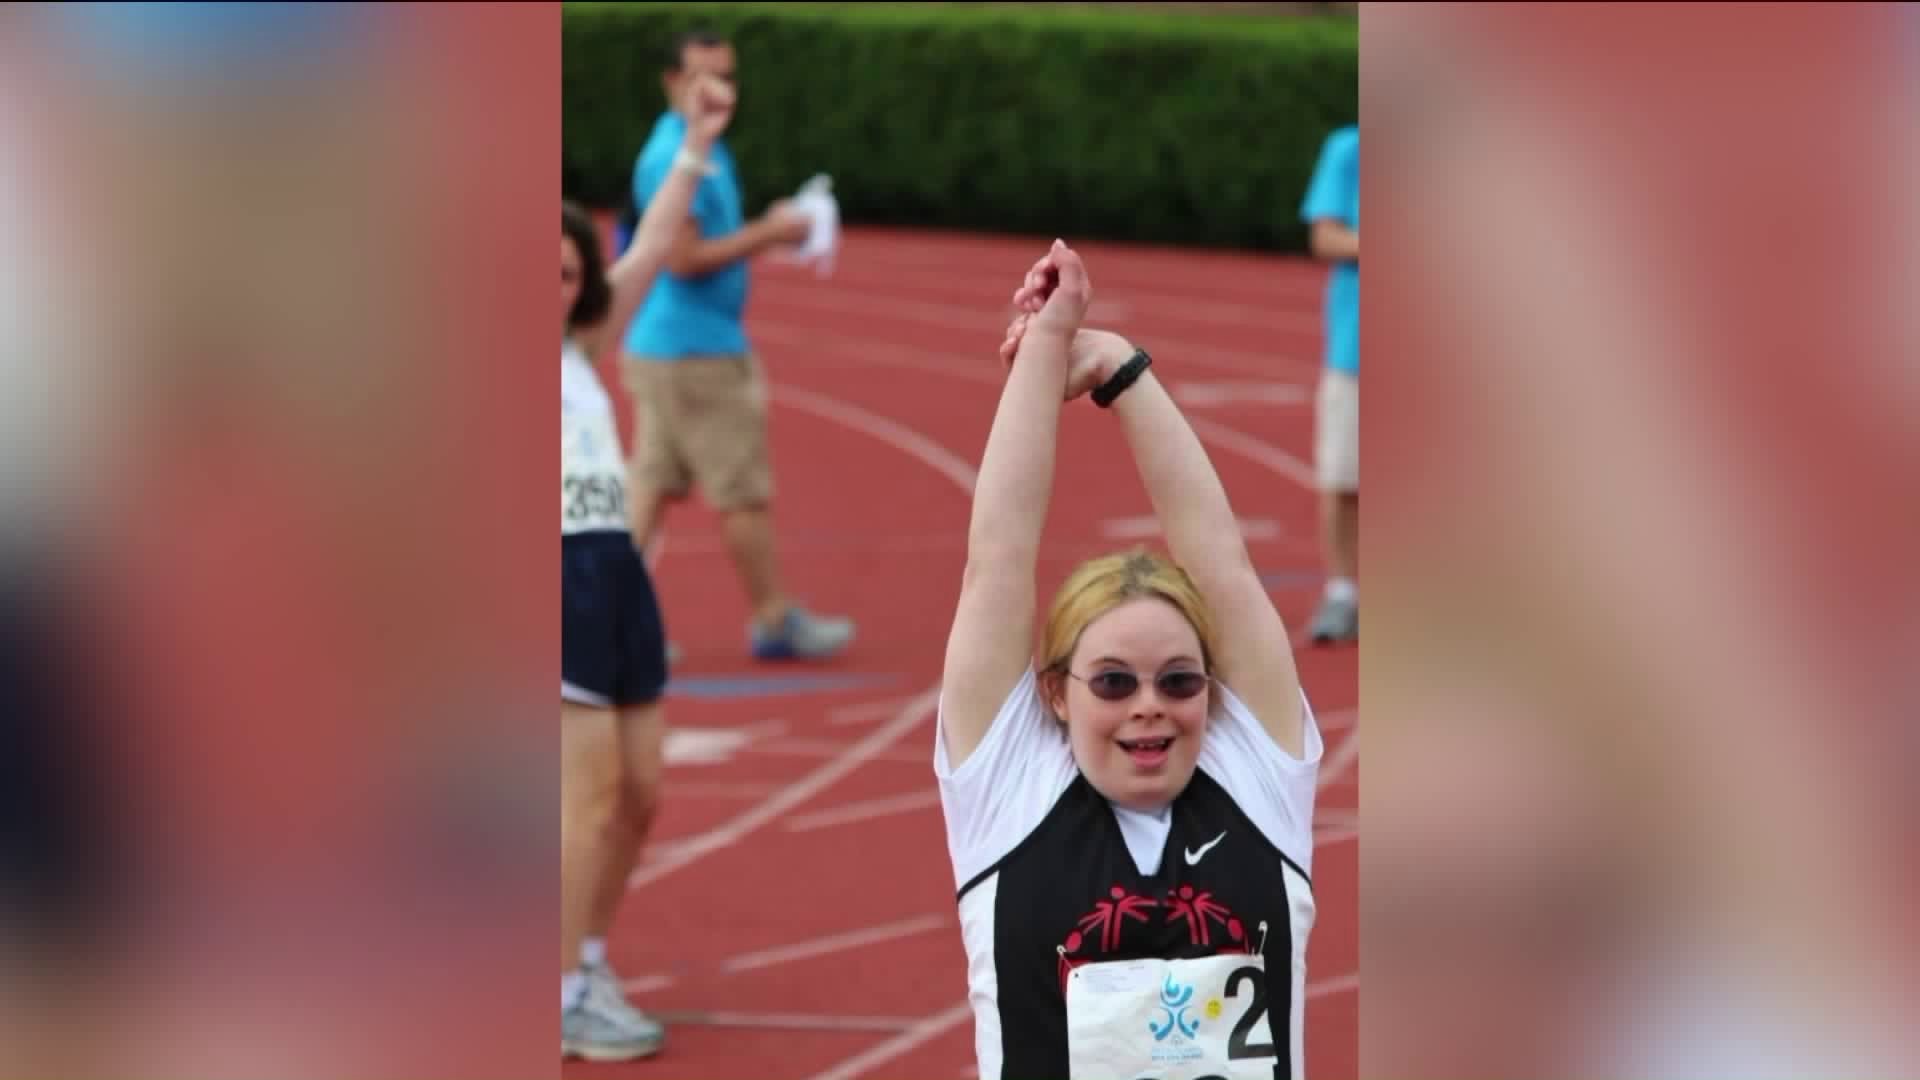 Special Olympic Athlete inspiring others on and off the court